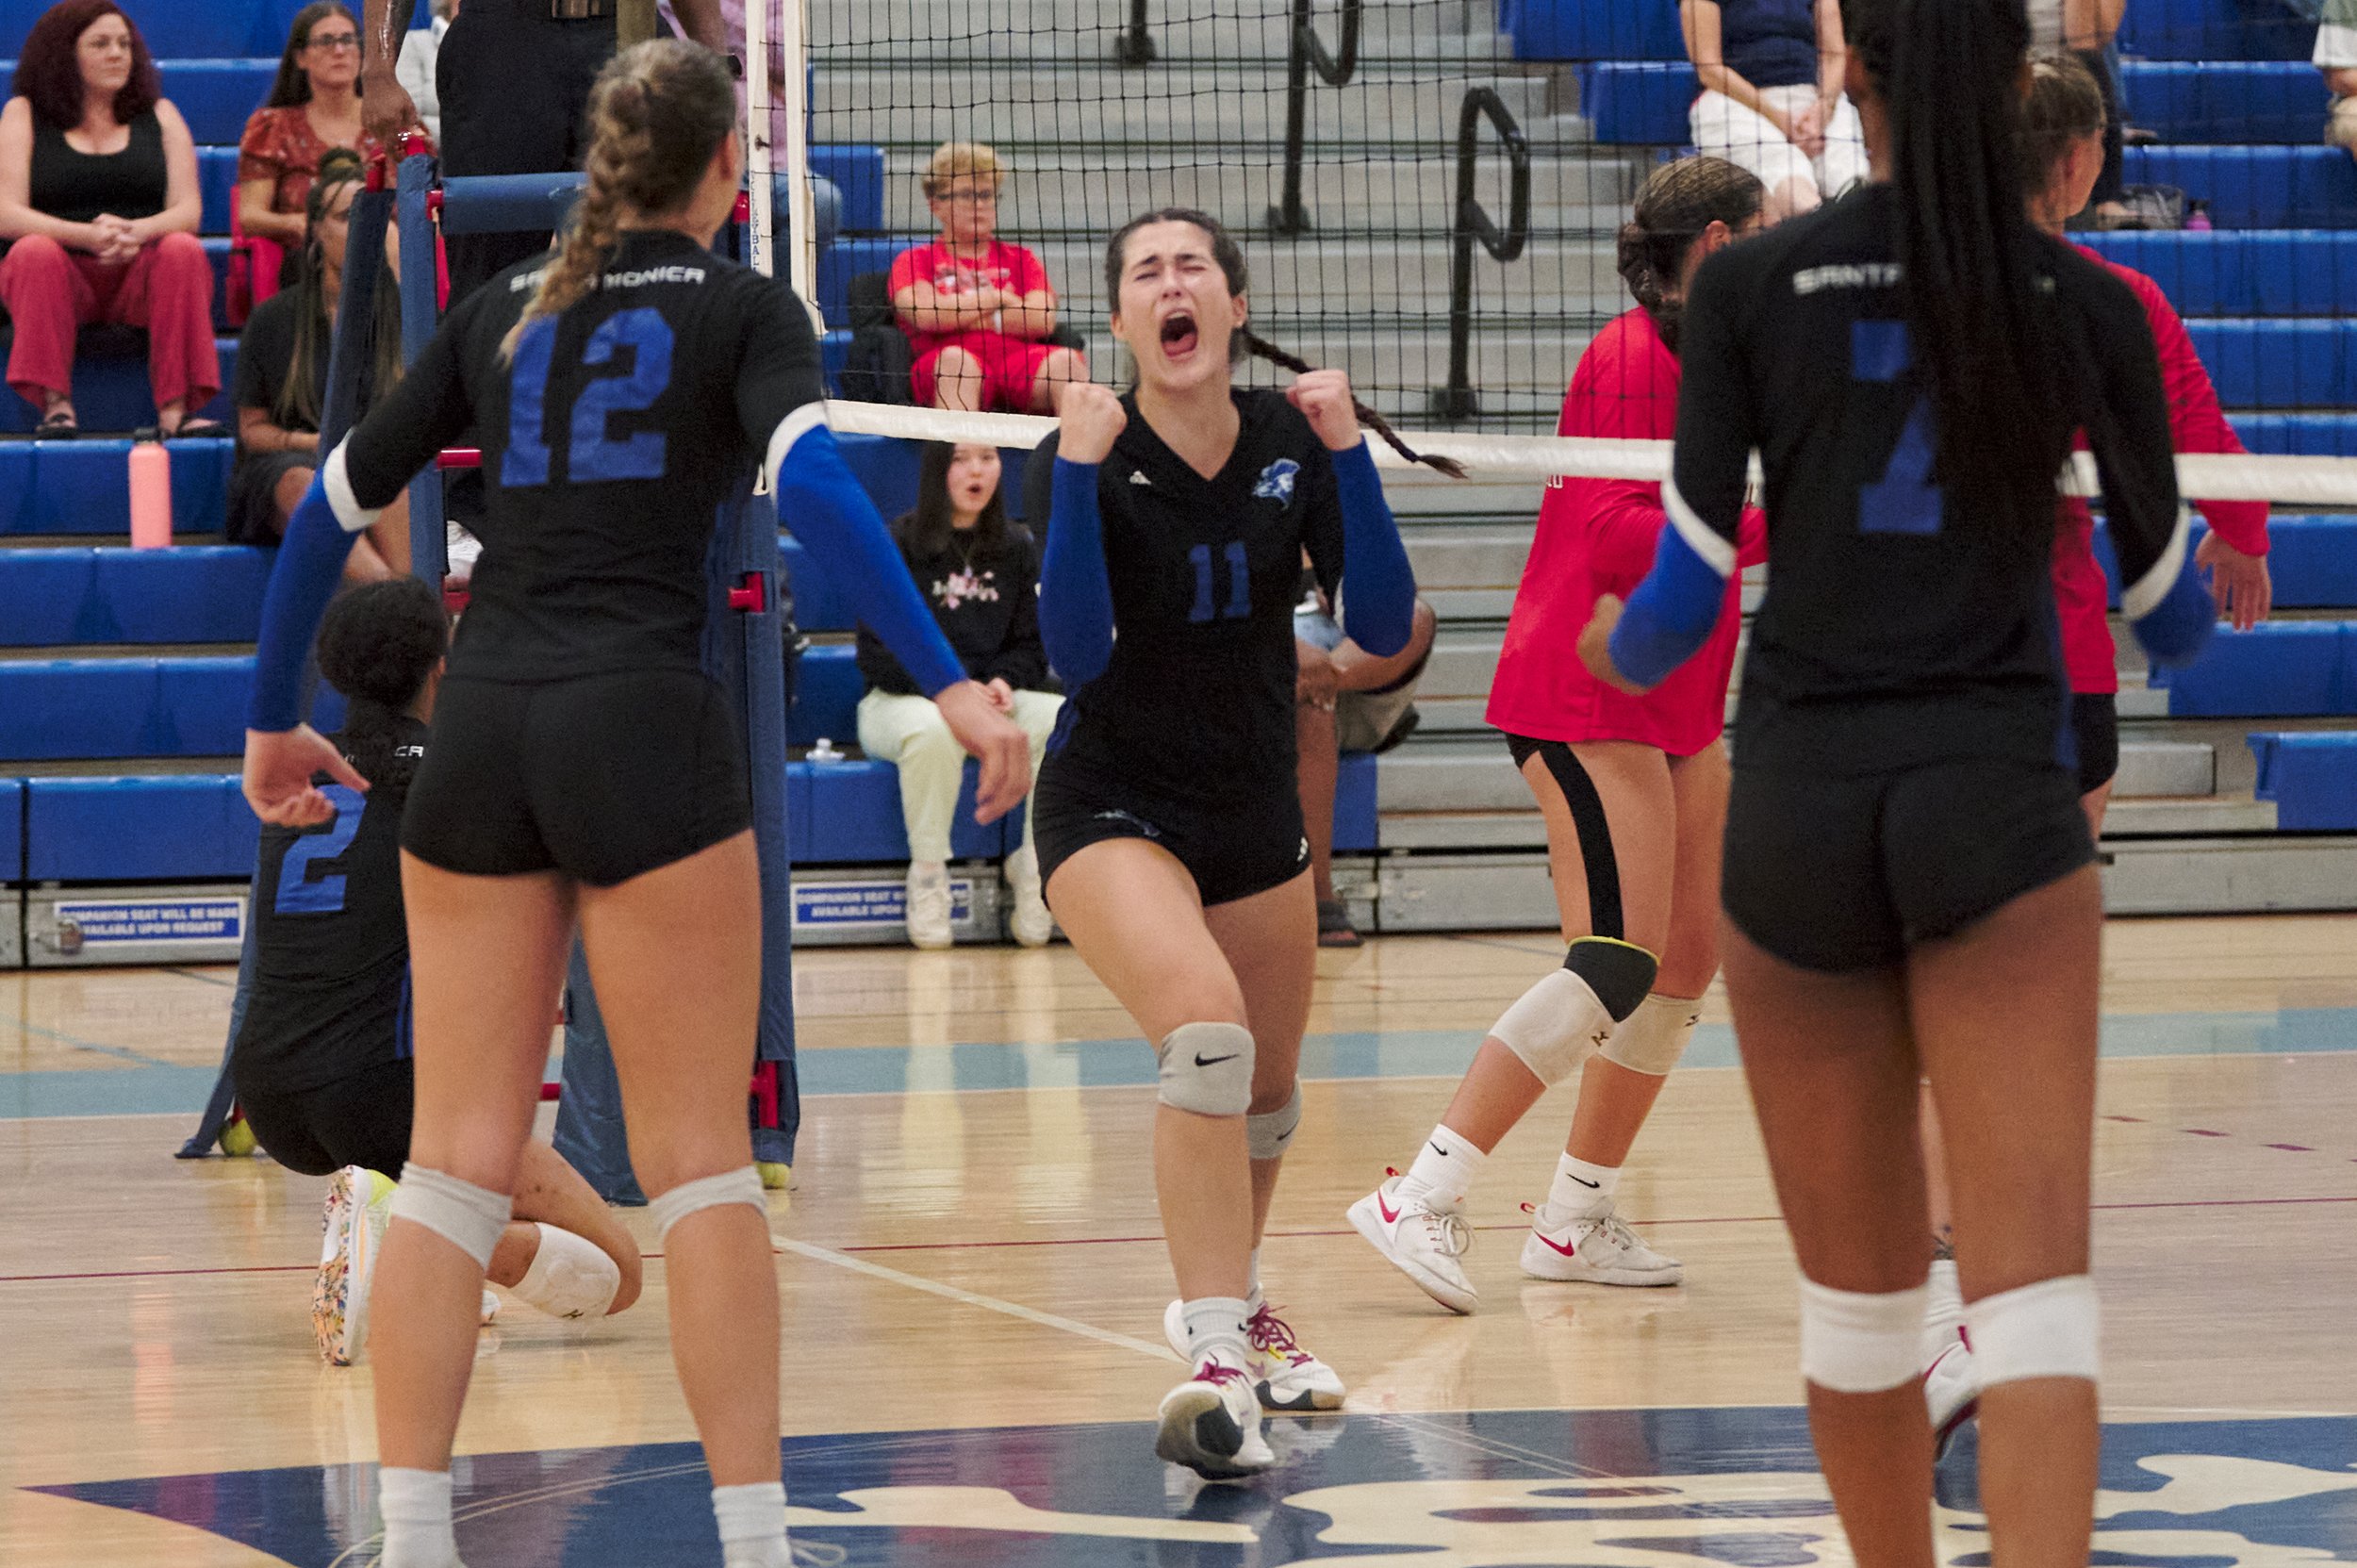  Maiella Riva (center) celebrates after scoring for the Santa Monica College Corsairs during the women's volleyball match against the Bakersfield College Renegades on Wednesday, Sept. 28, 2022, at the Corsair Gym in Santa Monica, Calif. The Corsairs 